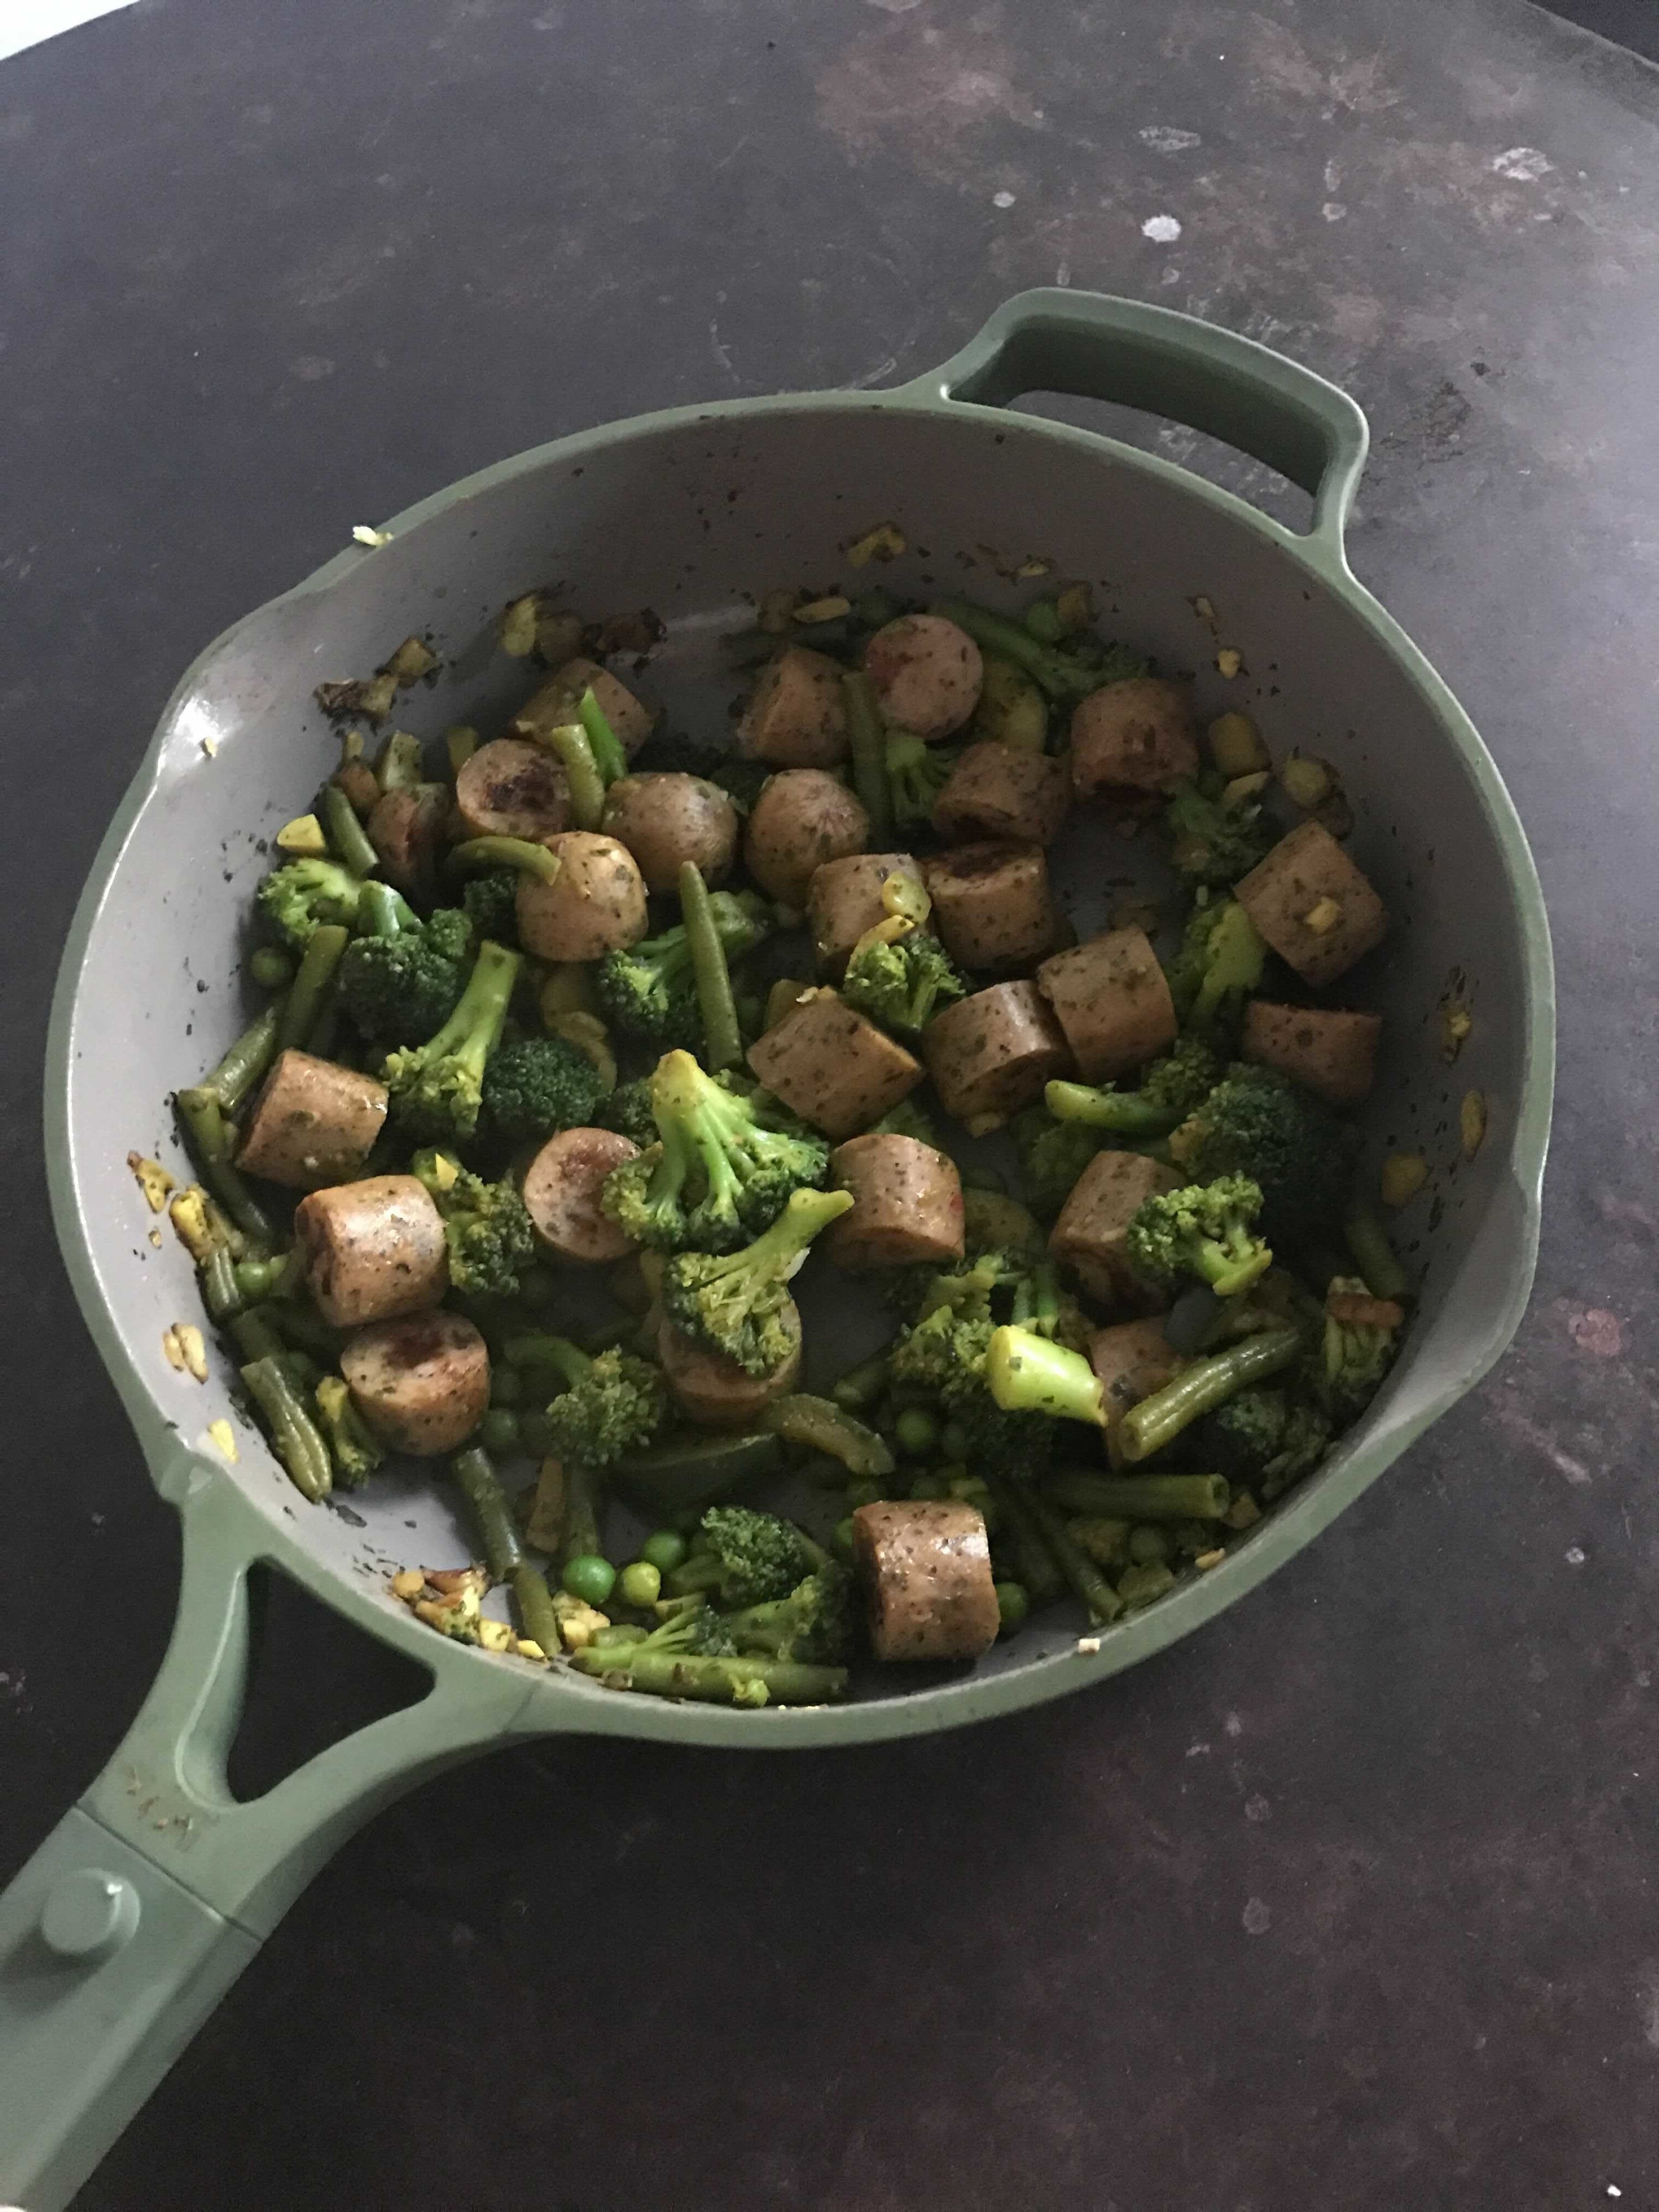 The pan in green with sausage and veggies inside